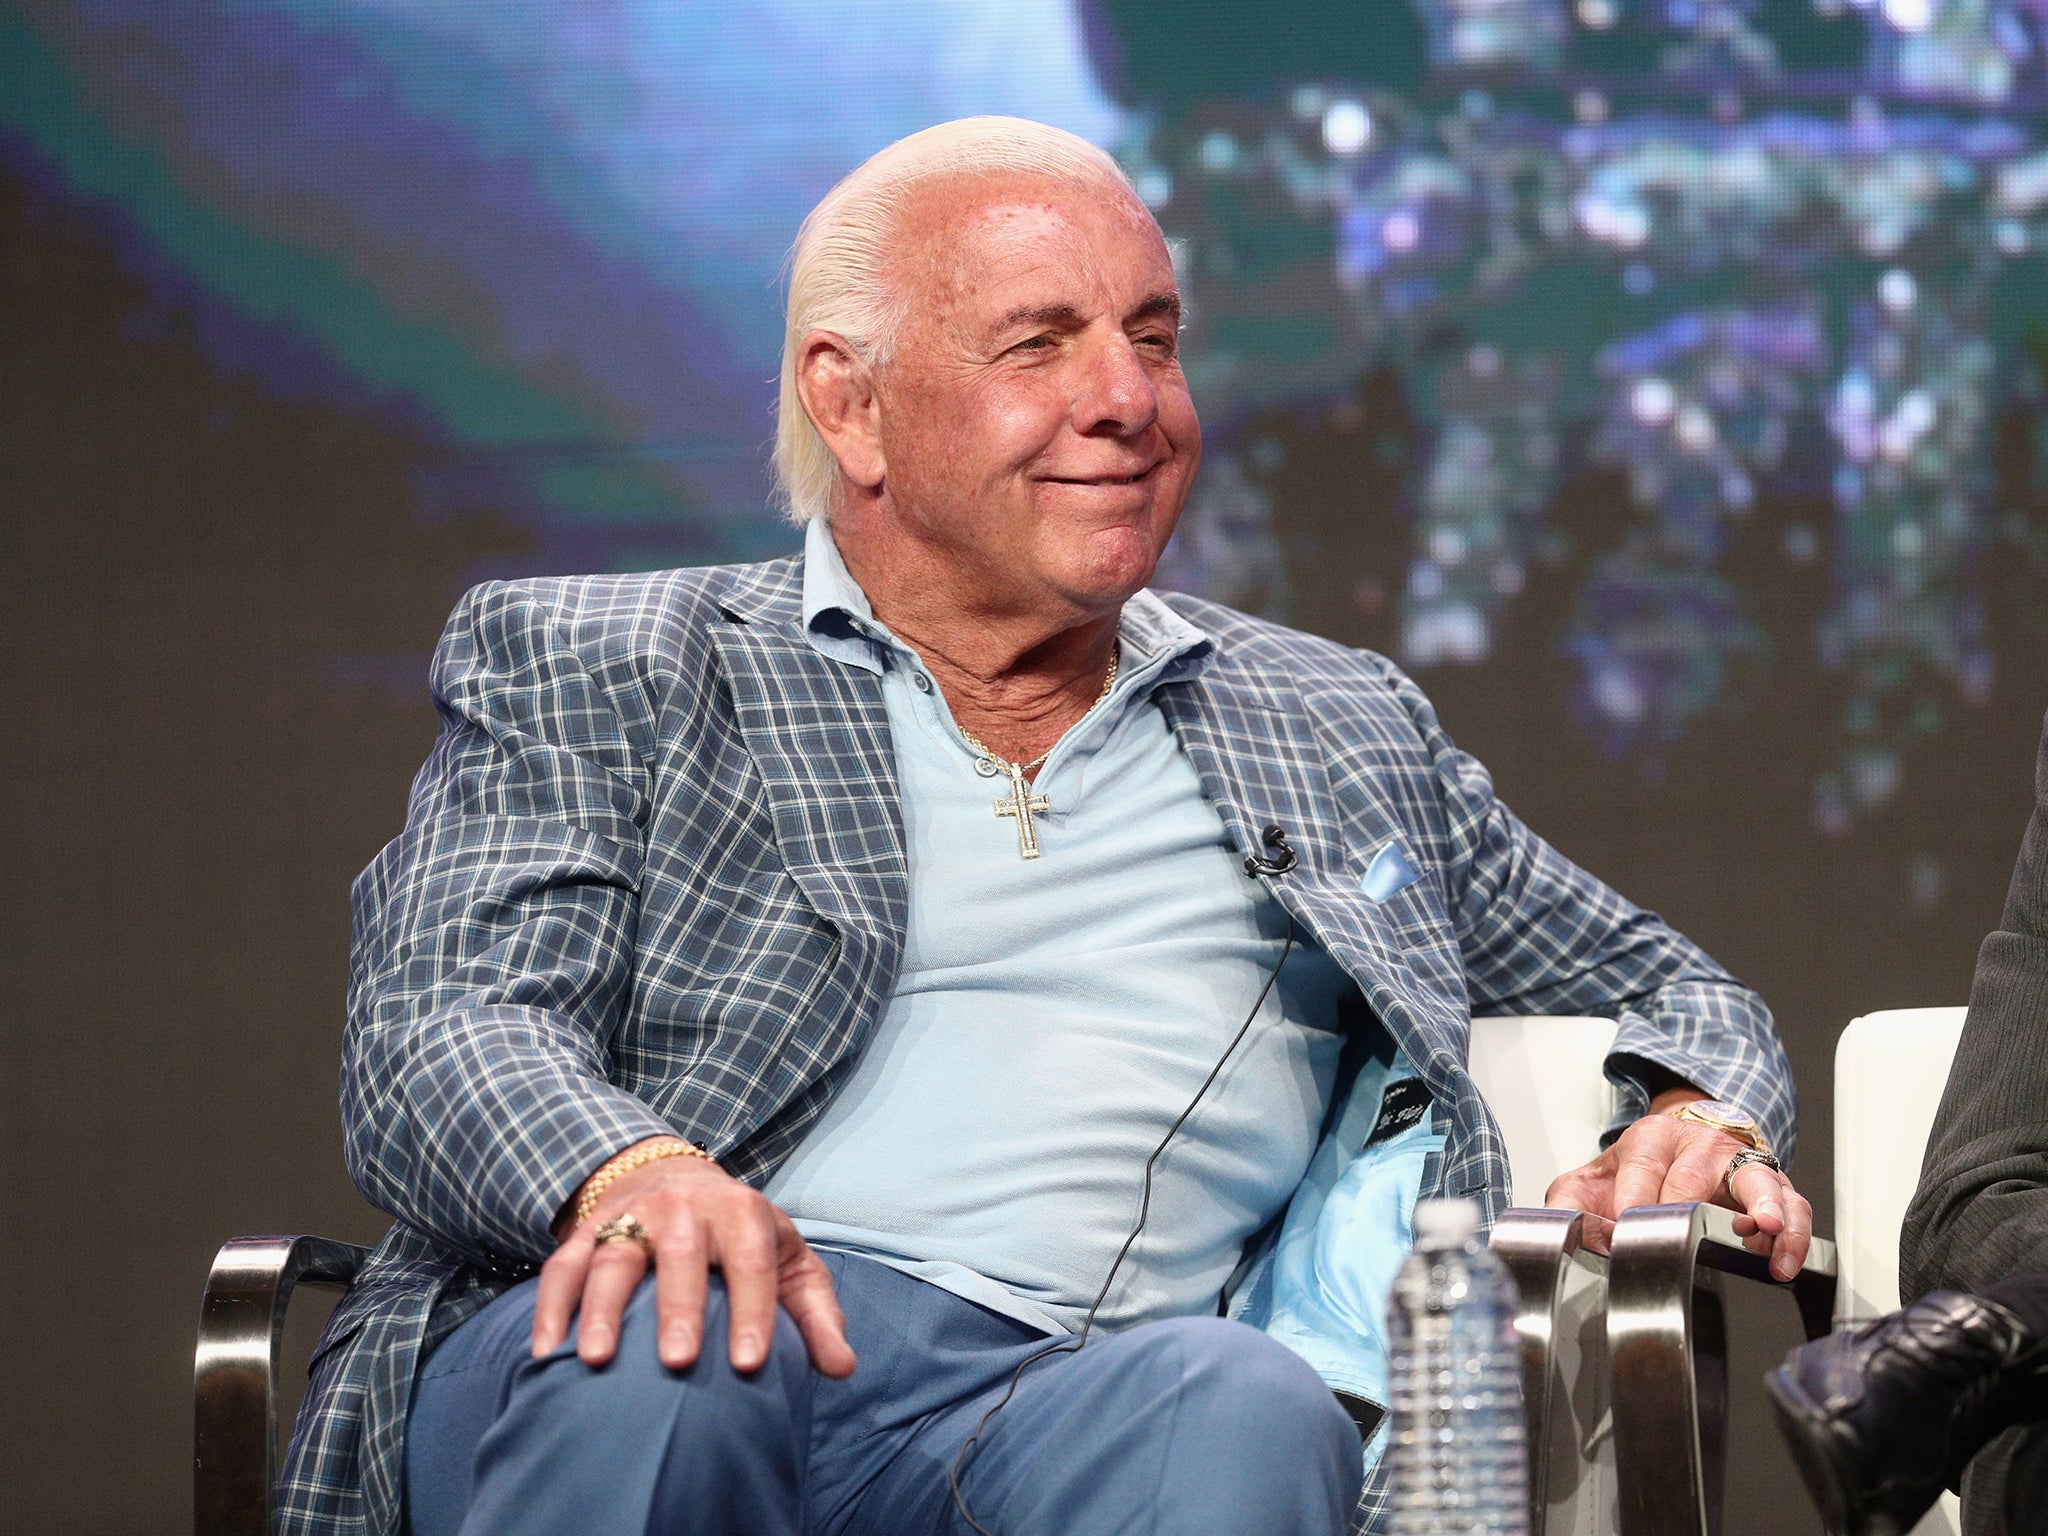 Ric Flair is in intensive care in an Atlanta hospital